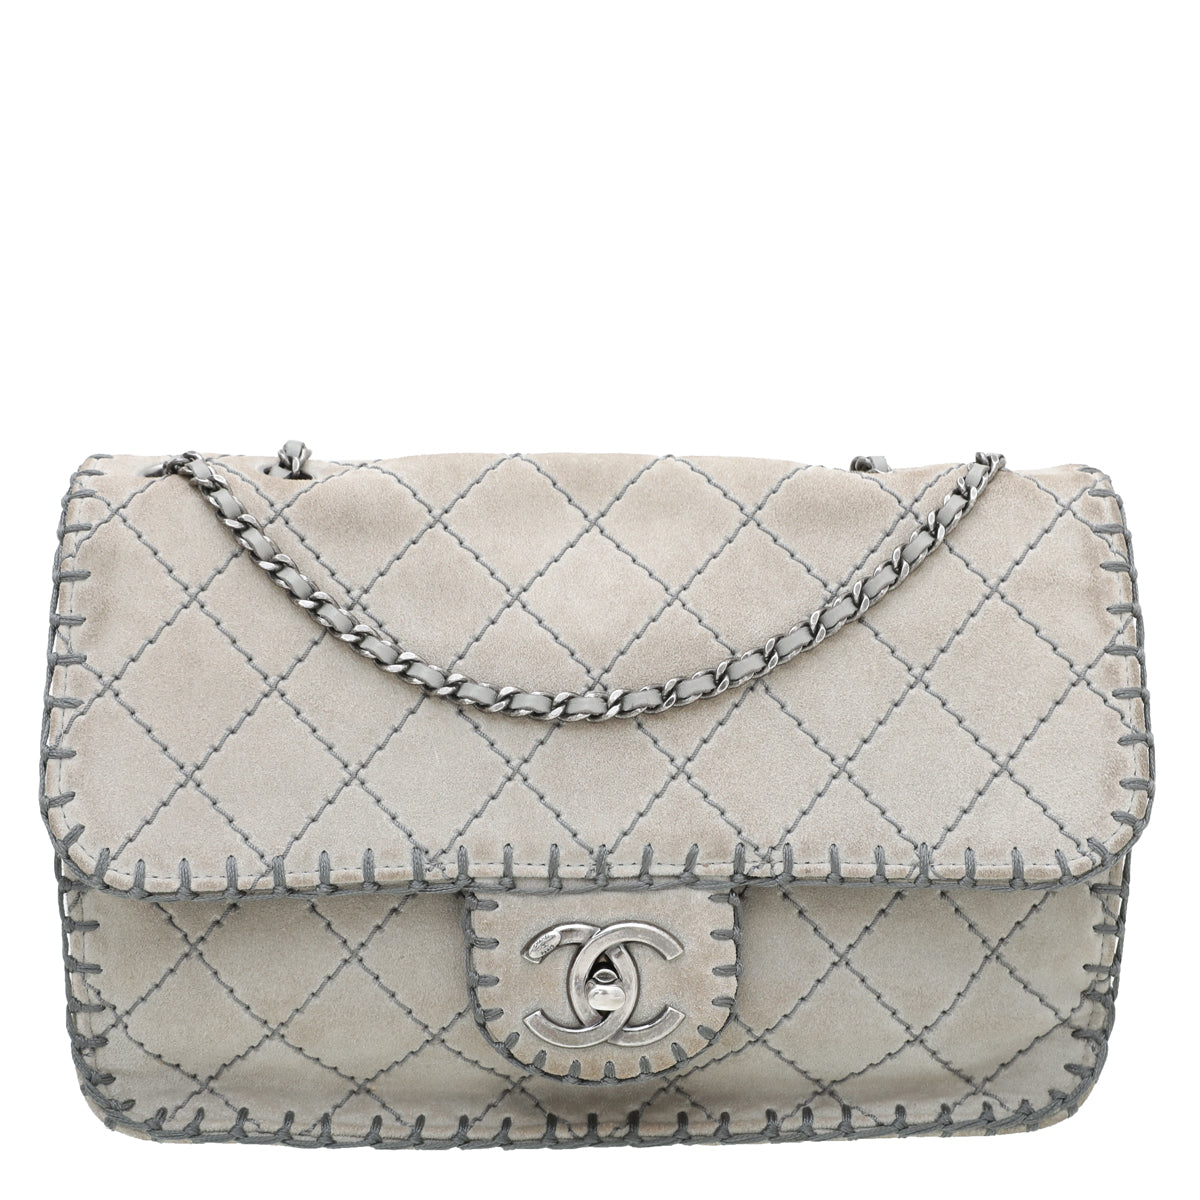 Chanel Gray Suede Stitch Flap Bag – The Closet